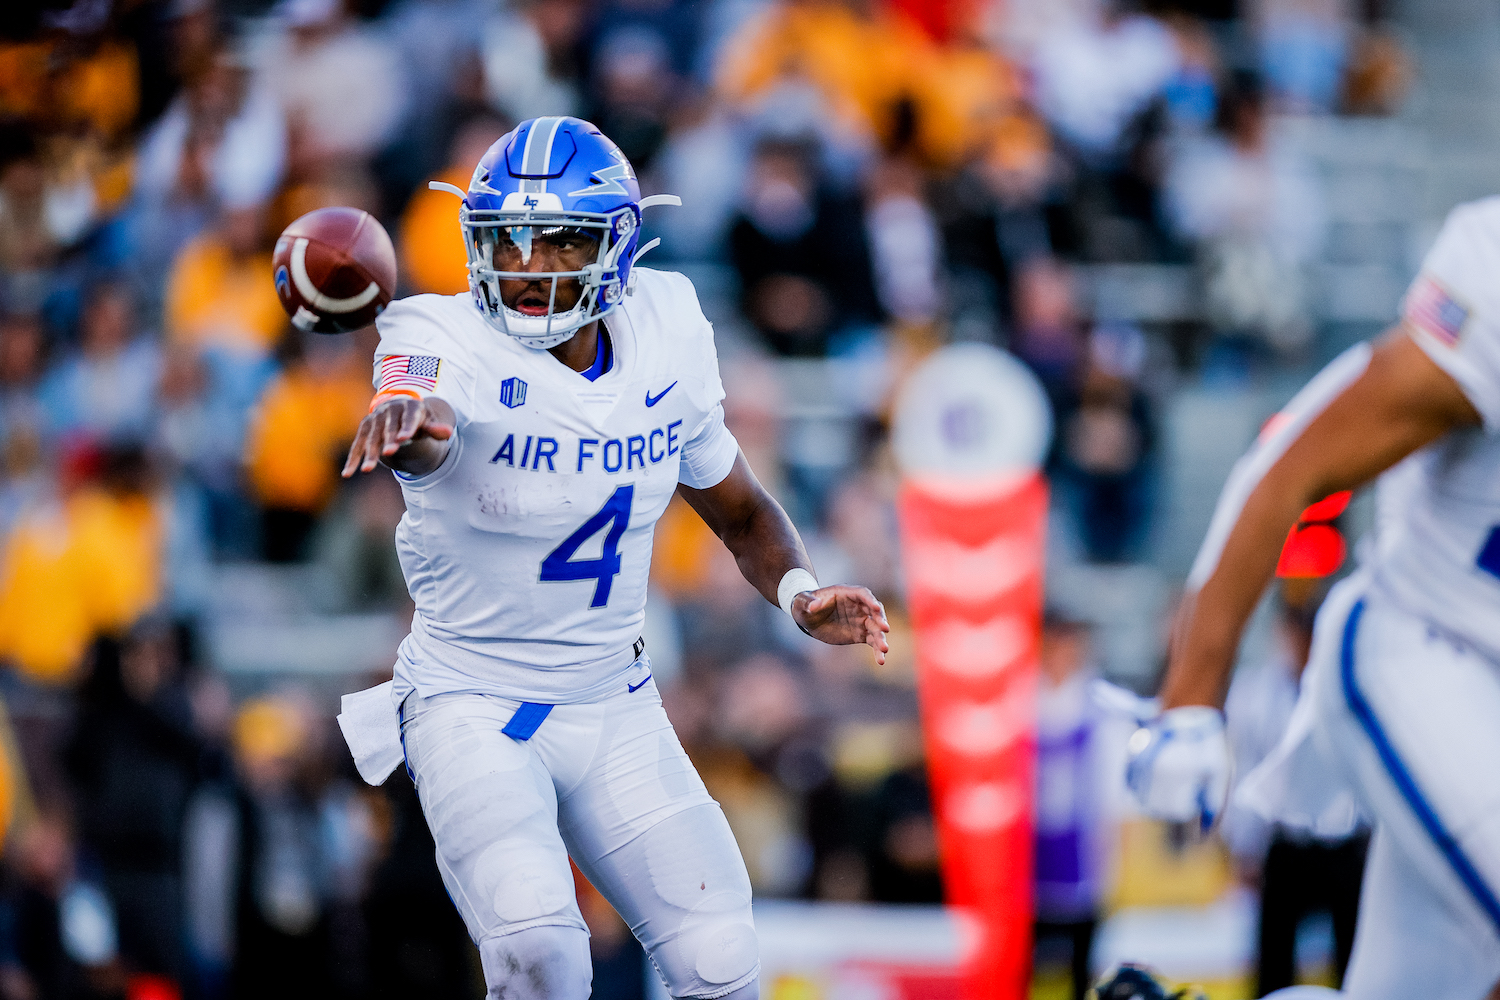 DVIDS - Images - Air Force Football defeats Nevada in Triple